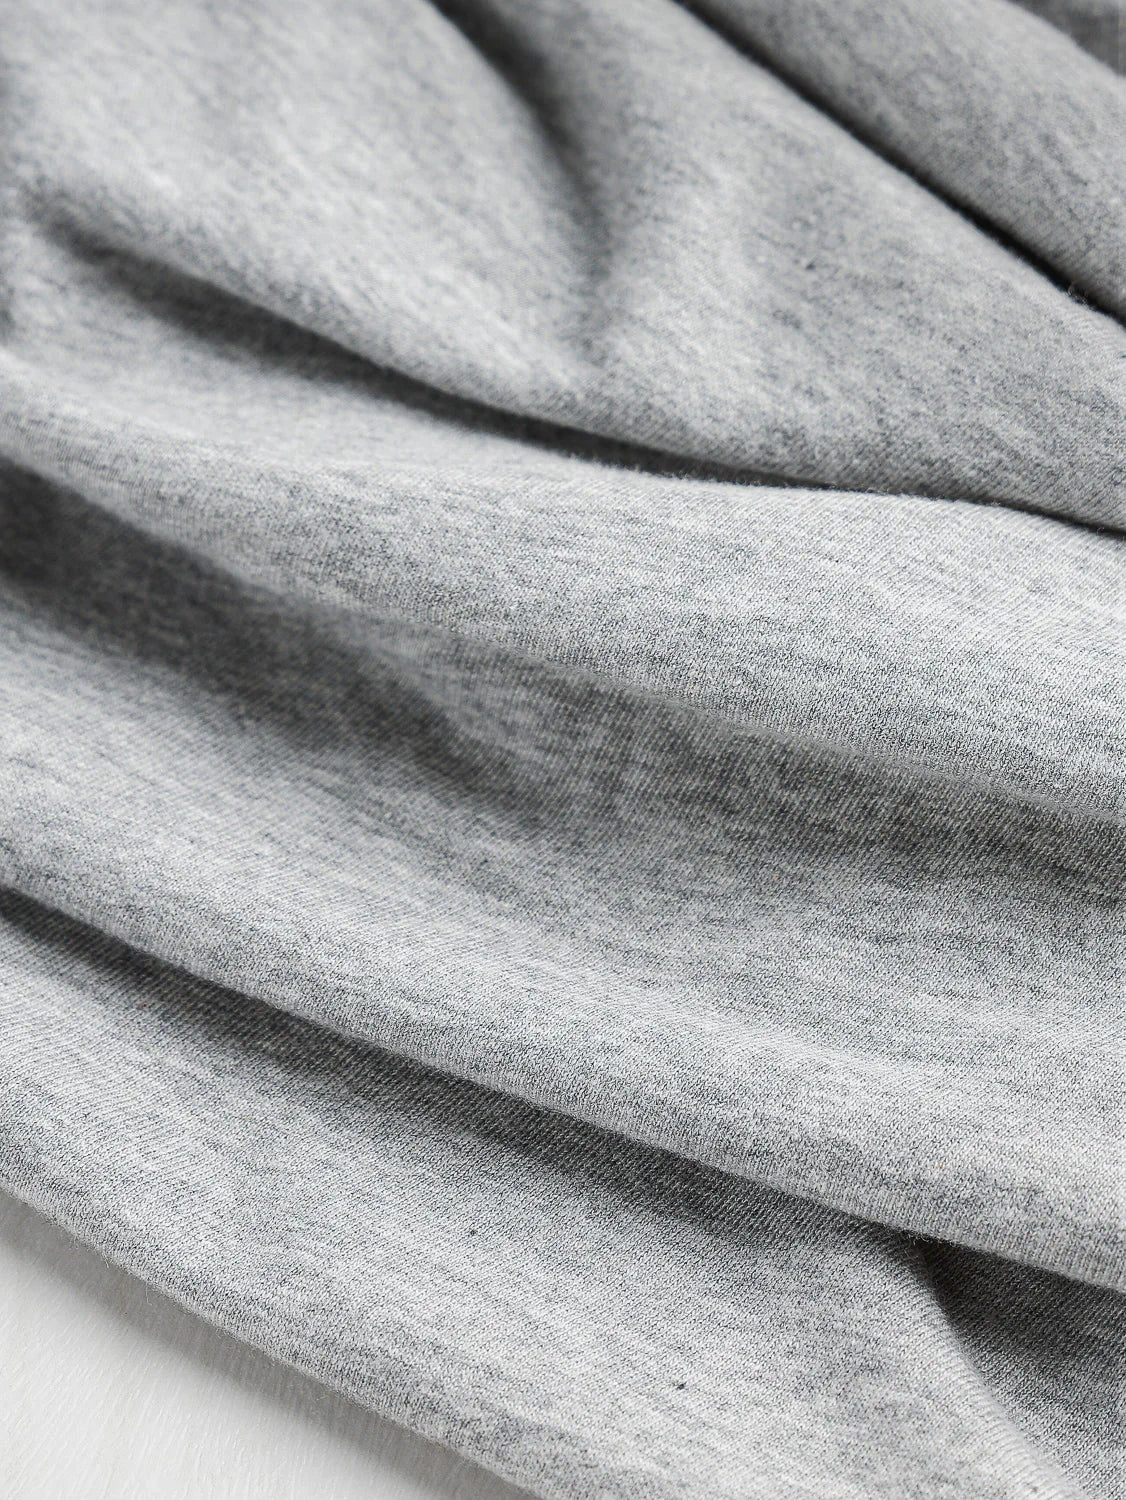 up close materiel of the grey off the shoulder long sleeve top